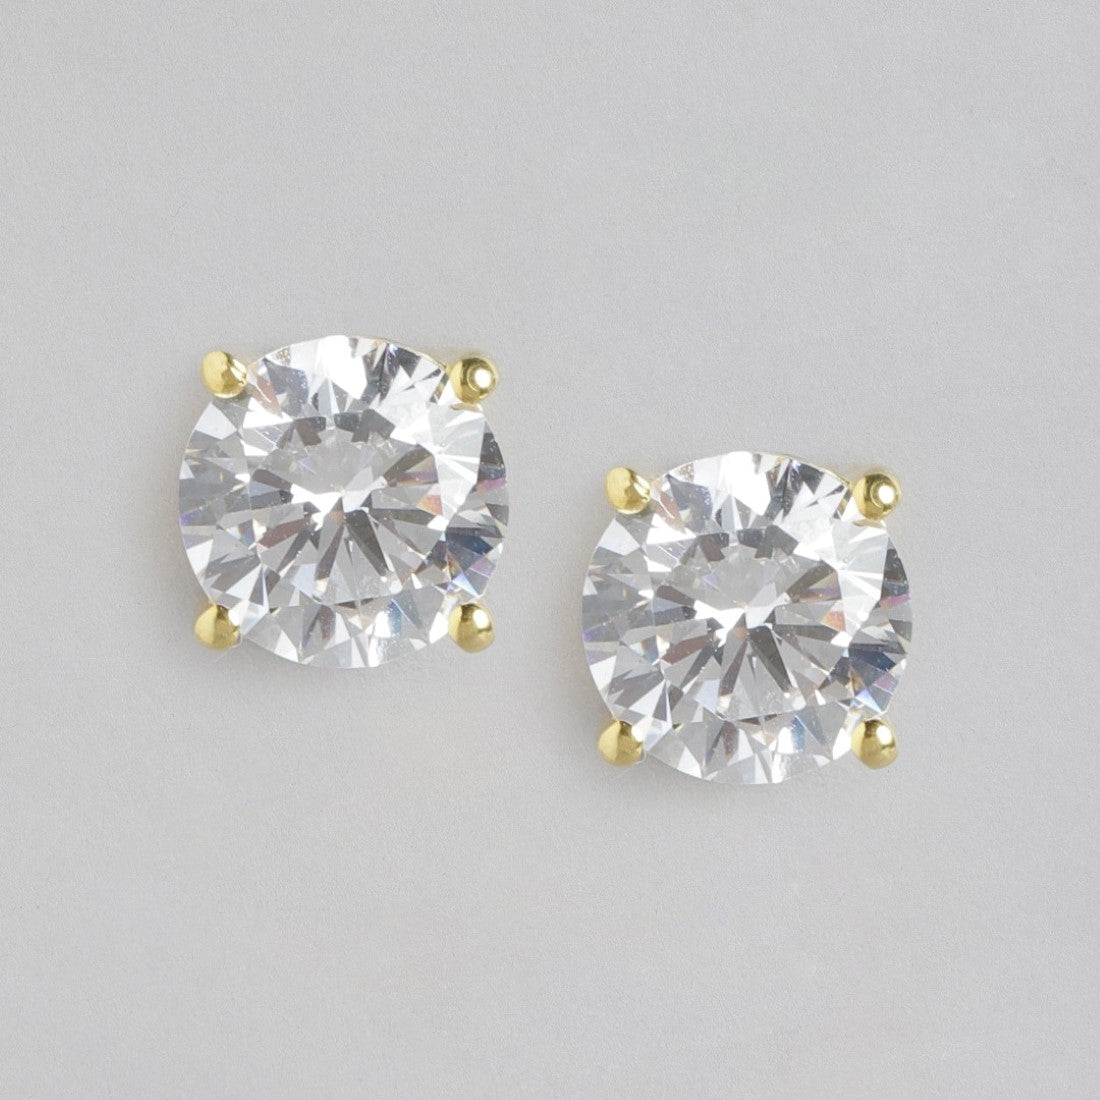 Dazzling Solitude Gold-Plated 925 Sterling Silver Stud Earrings